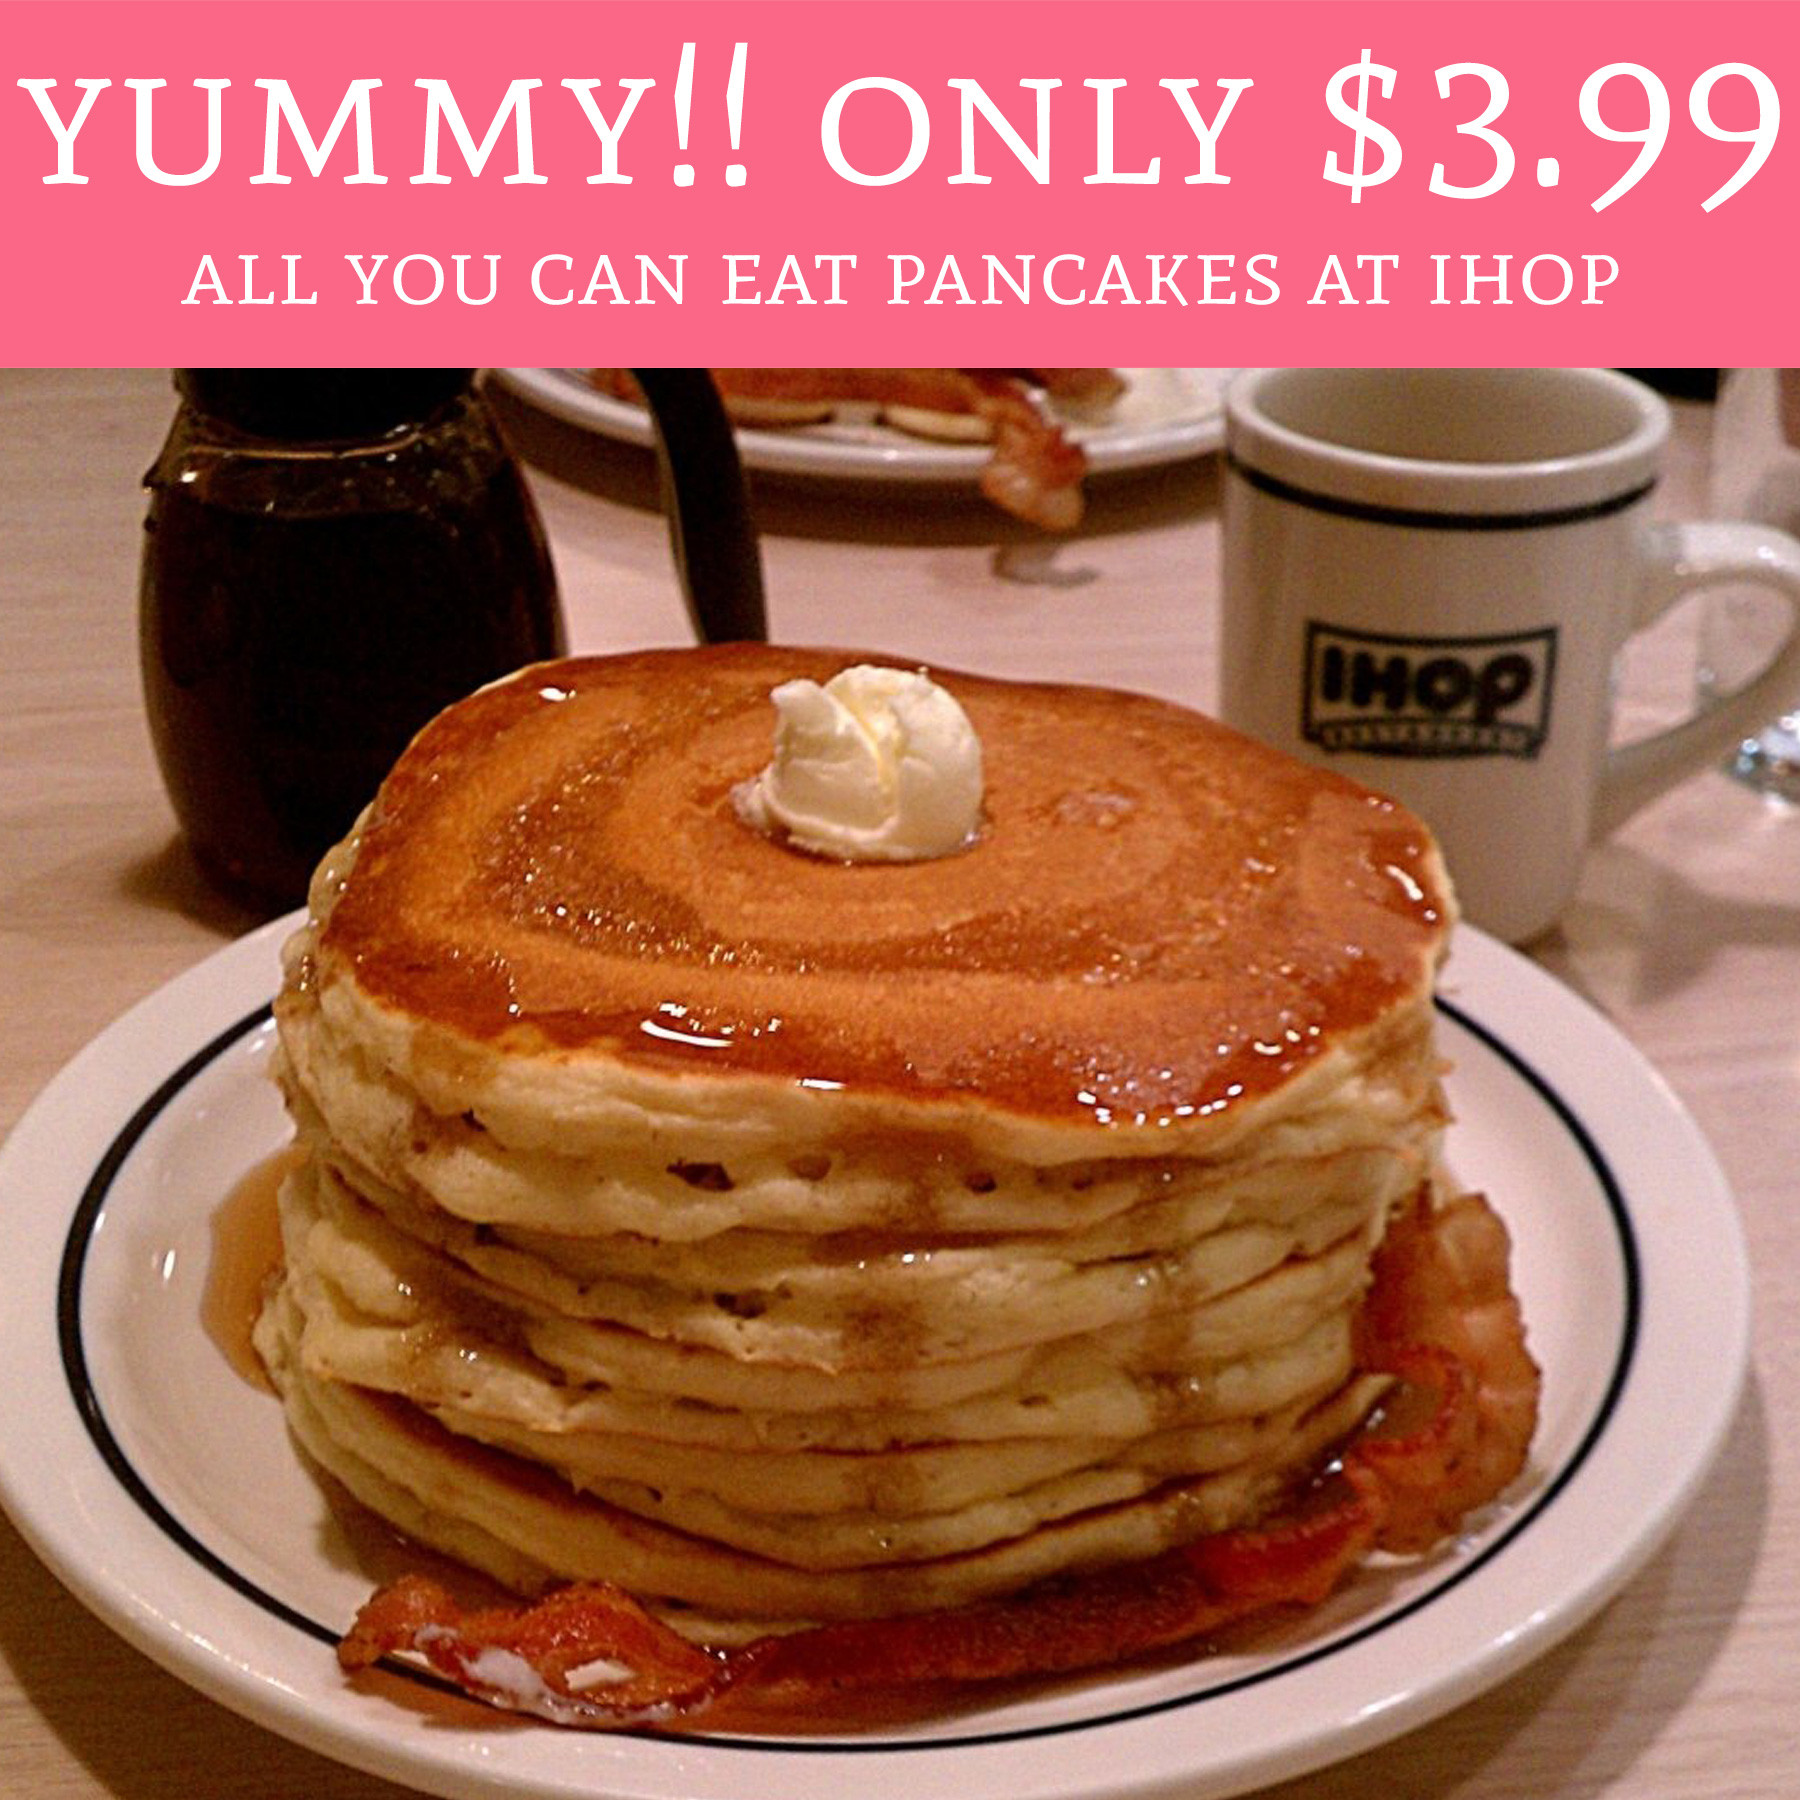 Ihop All You Can Eat Pancakes
 HOT ly $3 99 All You Can Eat Pancakes IHOP Deal